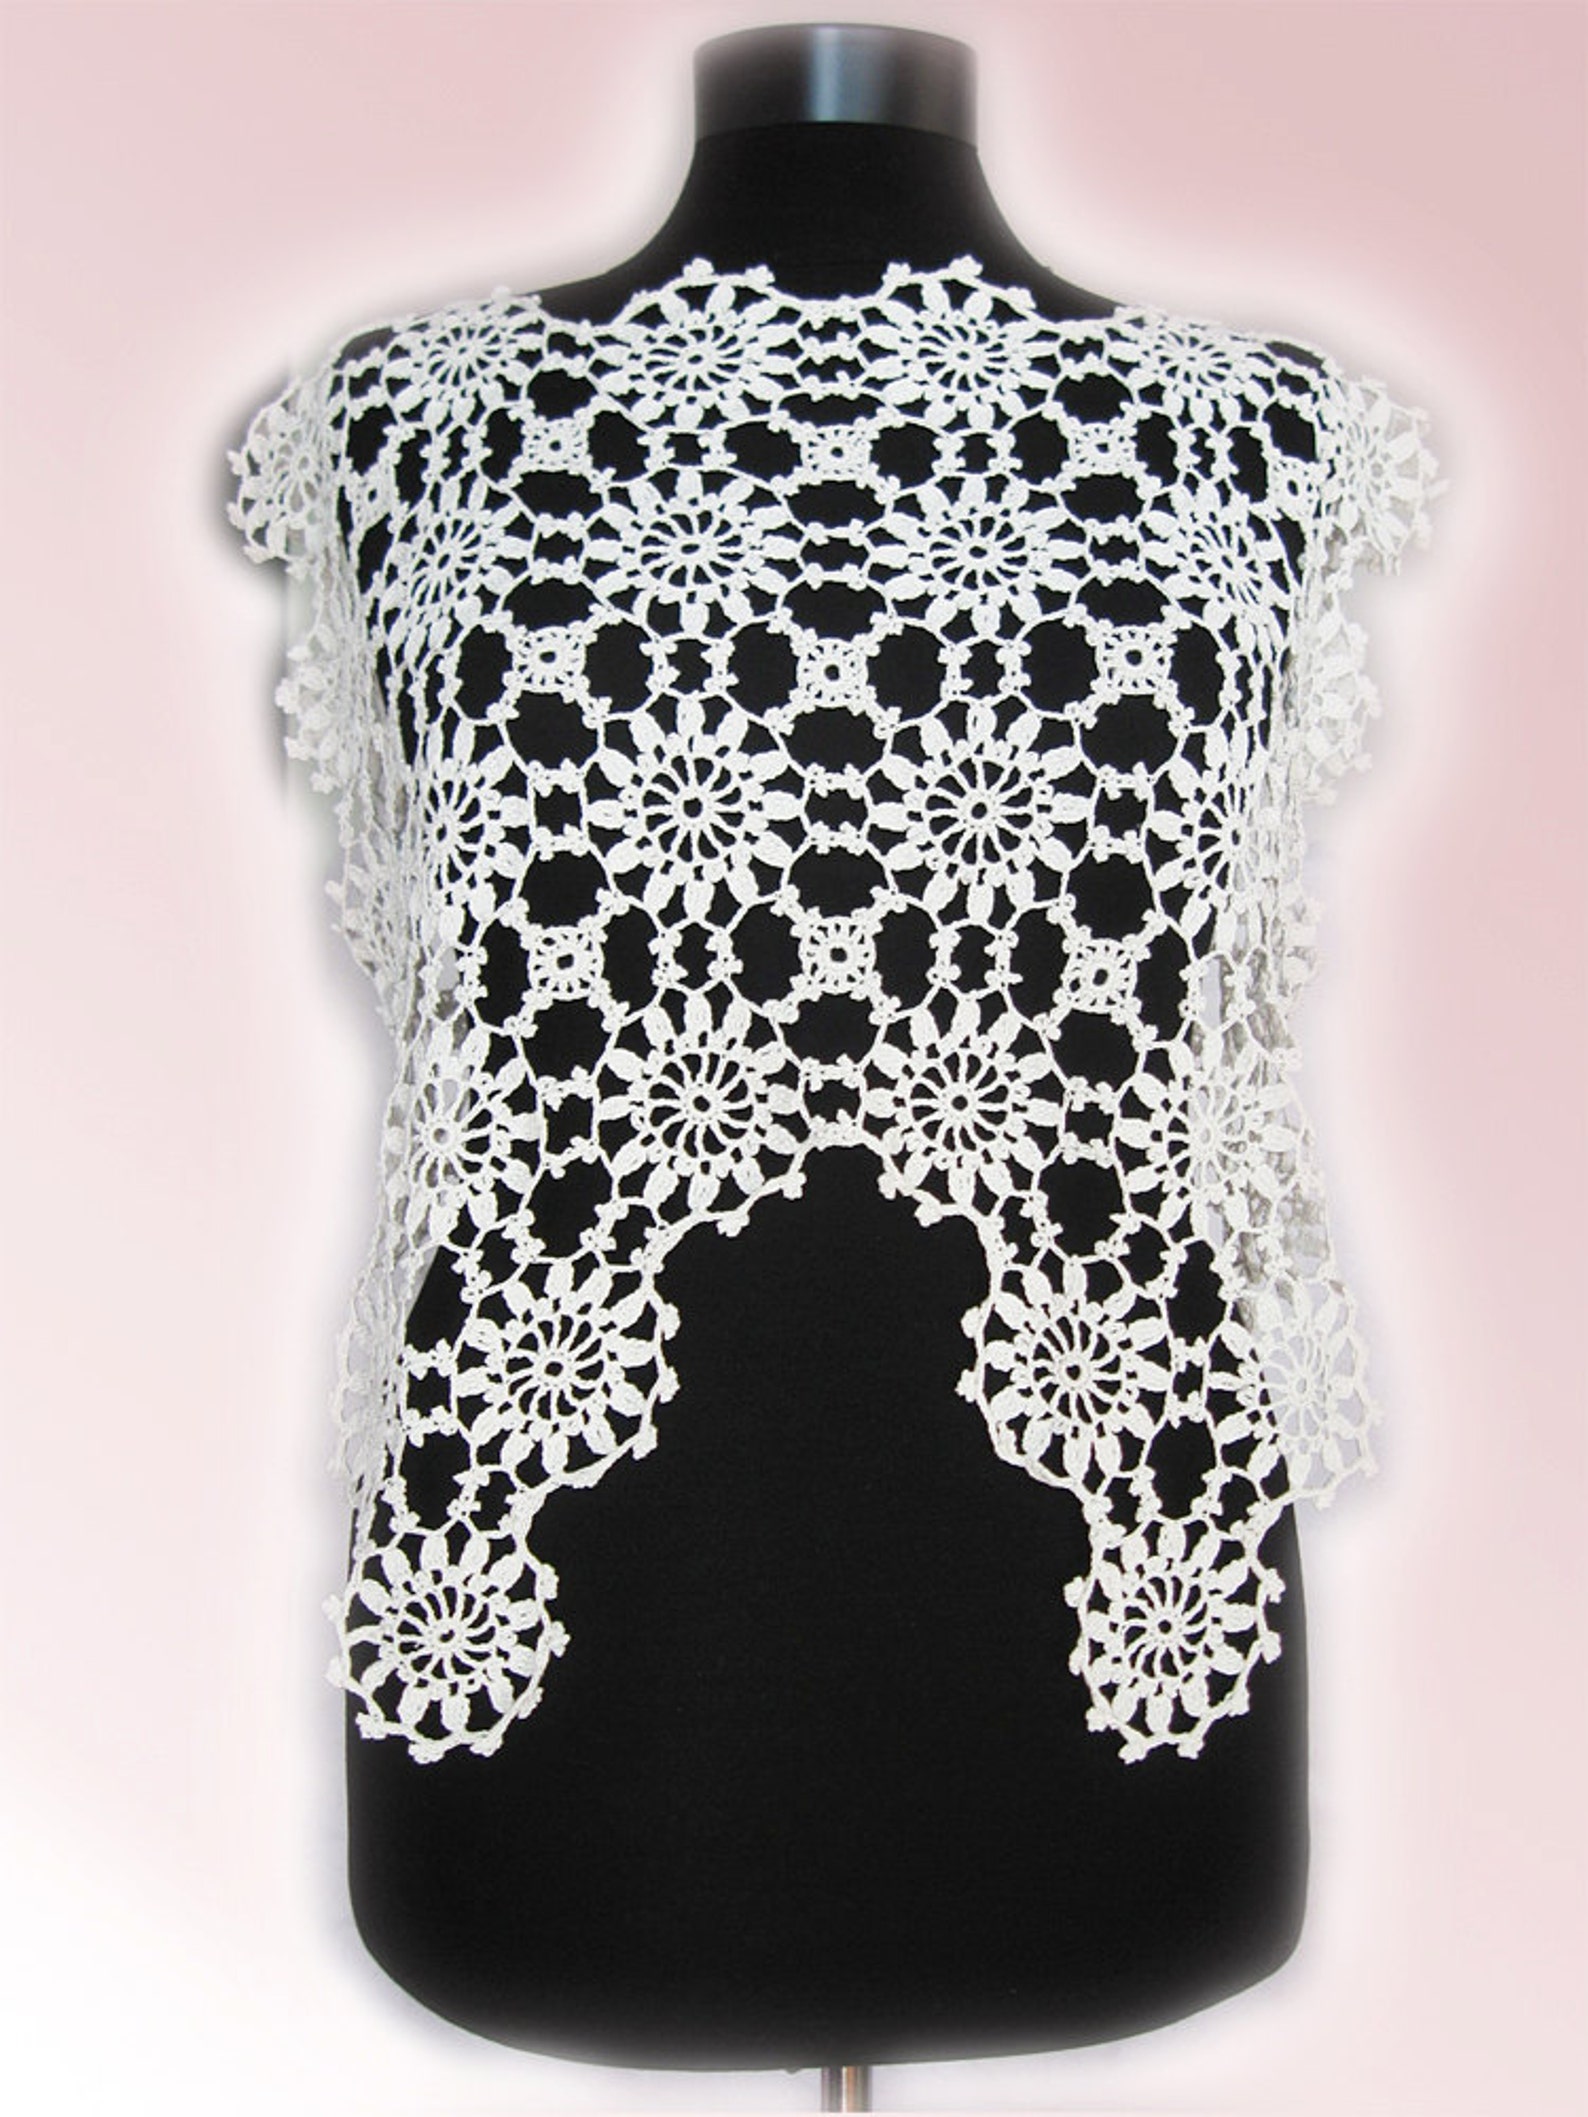 Bridal Lace Top Wedding Top Handmade Lace Top Lacee Cover - Etsy